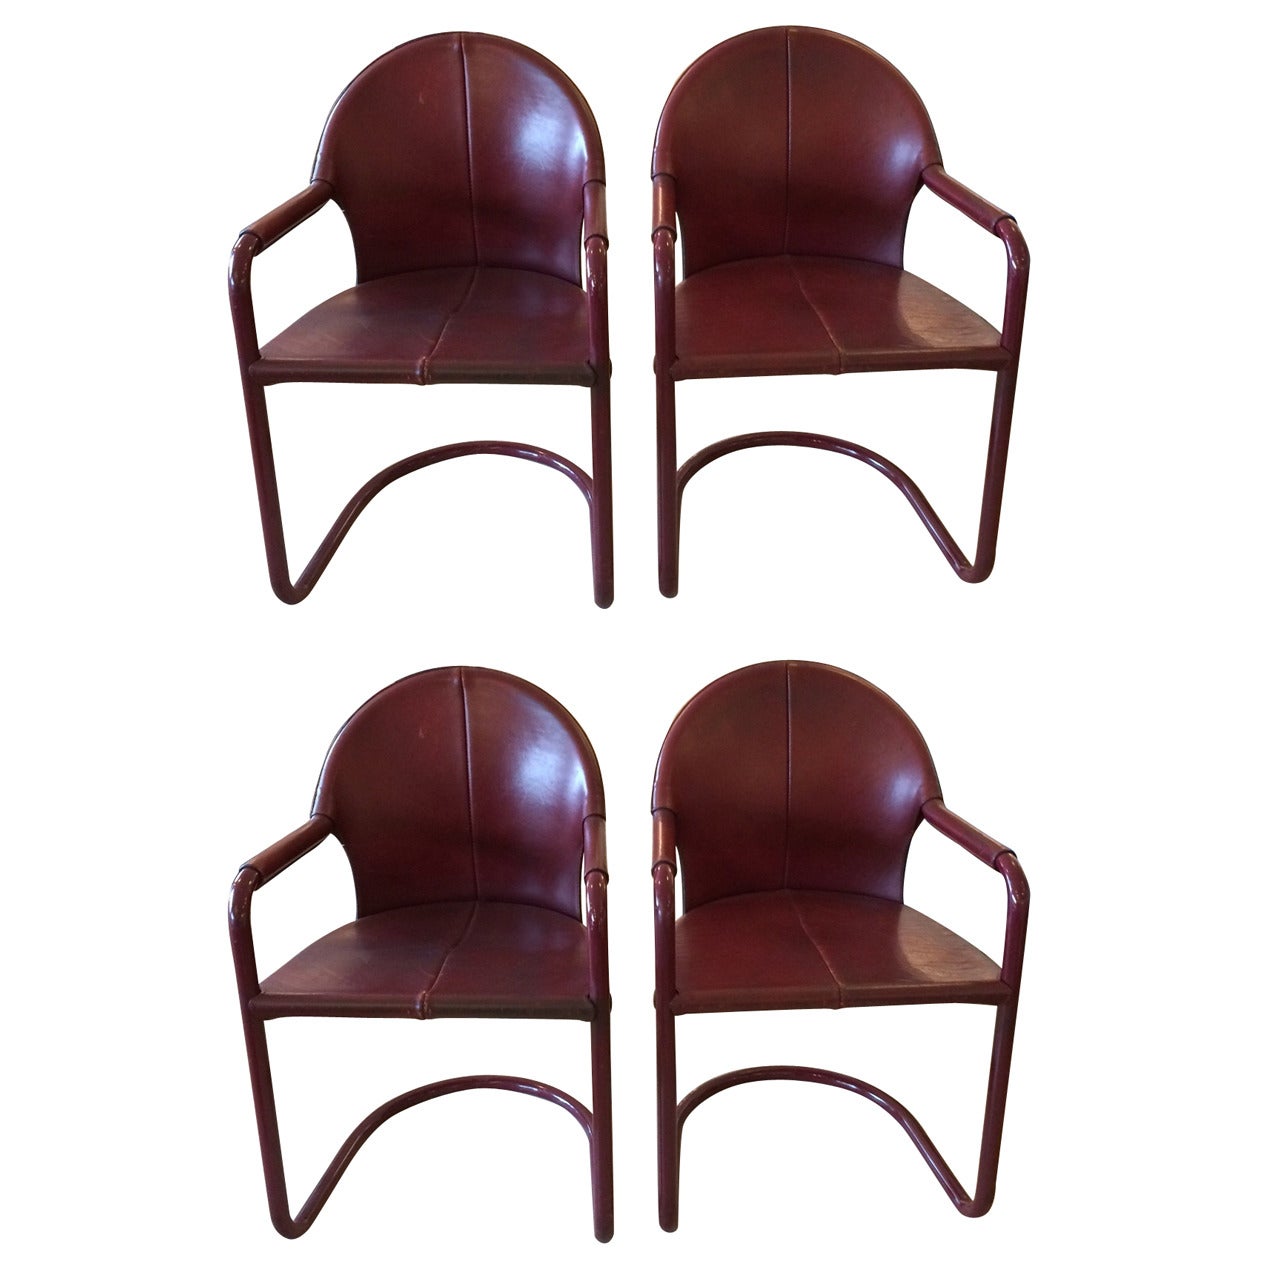 Four Rich Italian Cranberry Leather and Aluminum Armchairs